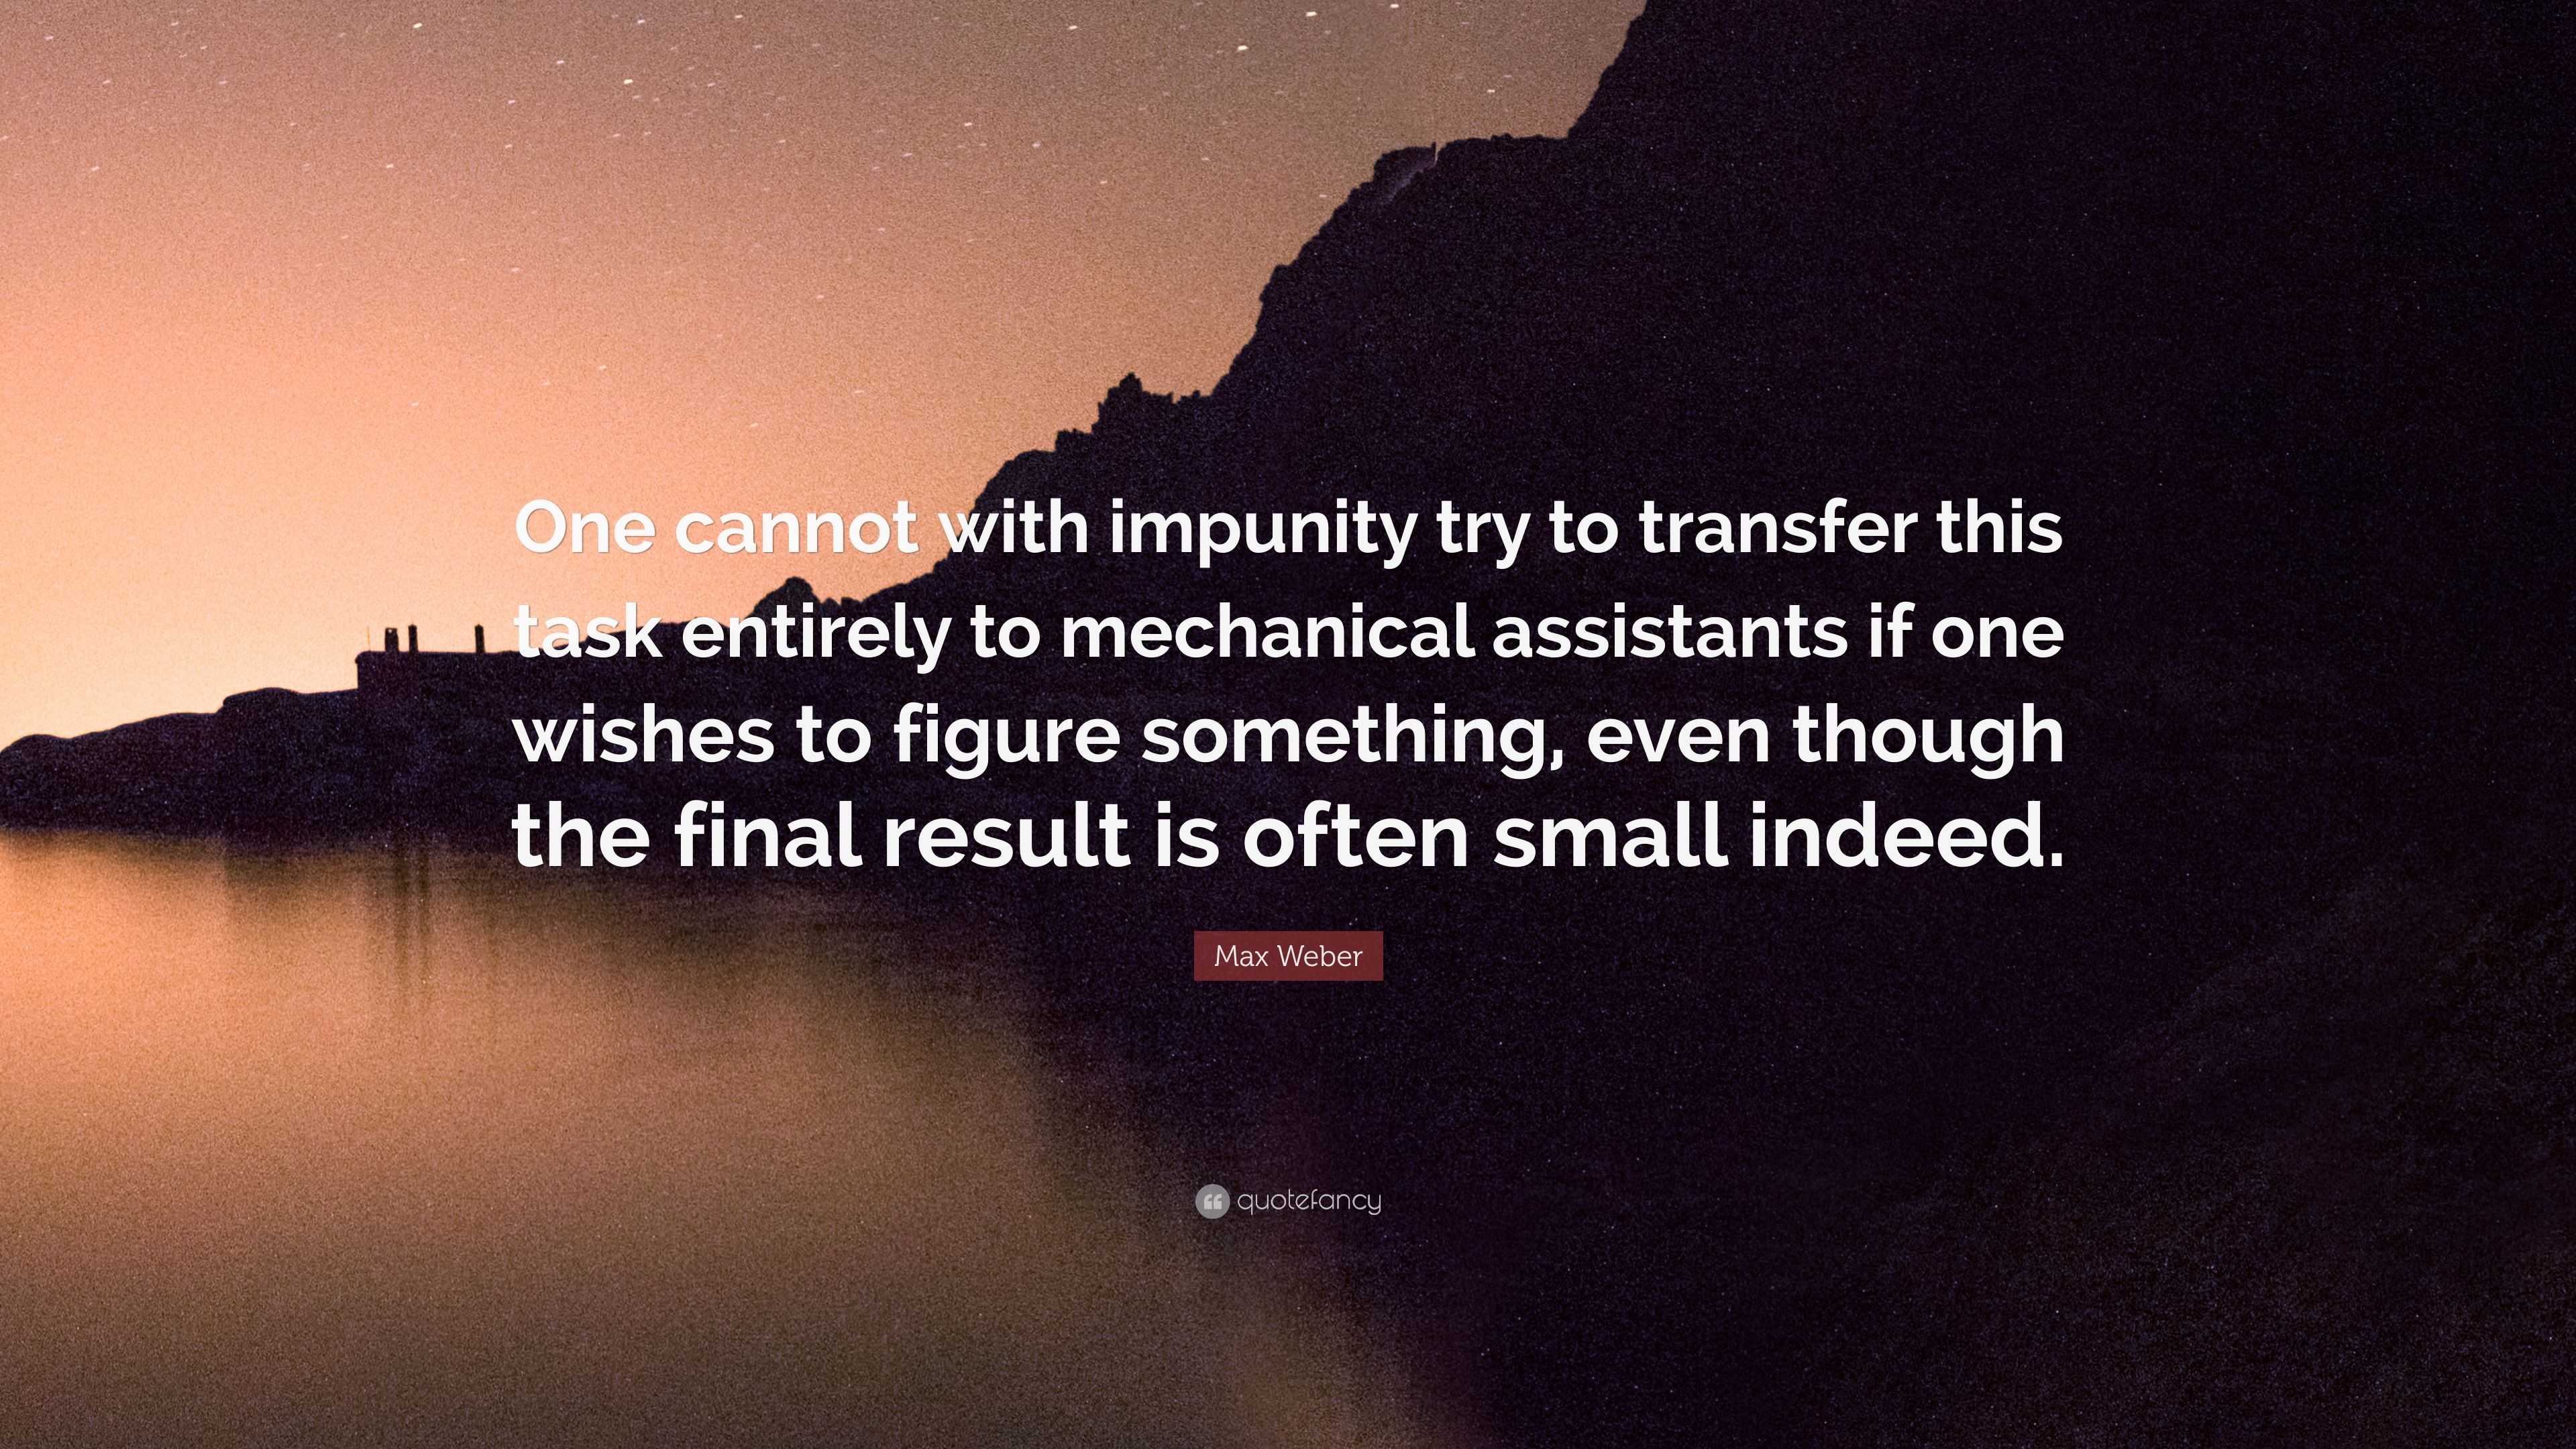 https://quotefancy.com/media/wallpaper/3840x2160/3128139-Max-Weber-Quote-One-cannot-with-impunity-try-to-transfer-this-task.jpg